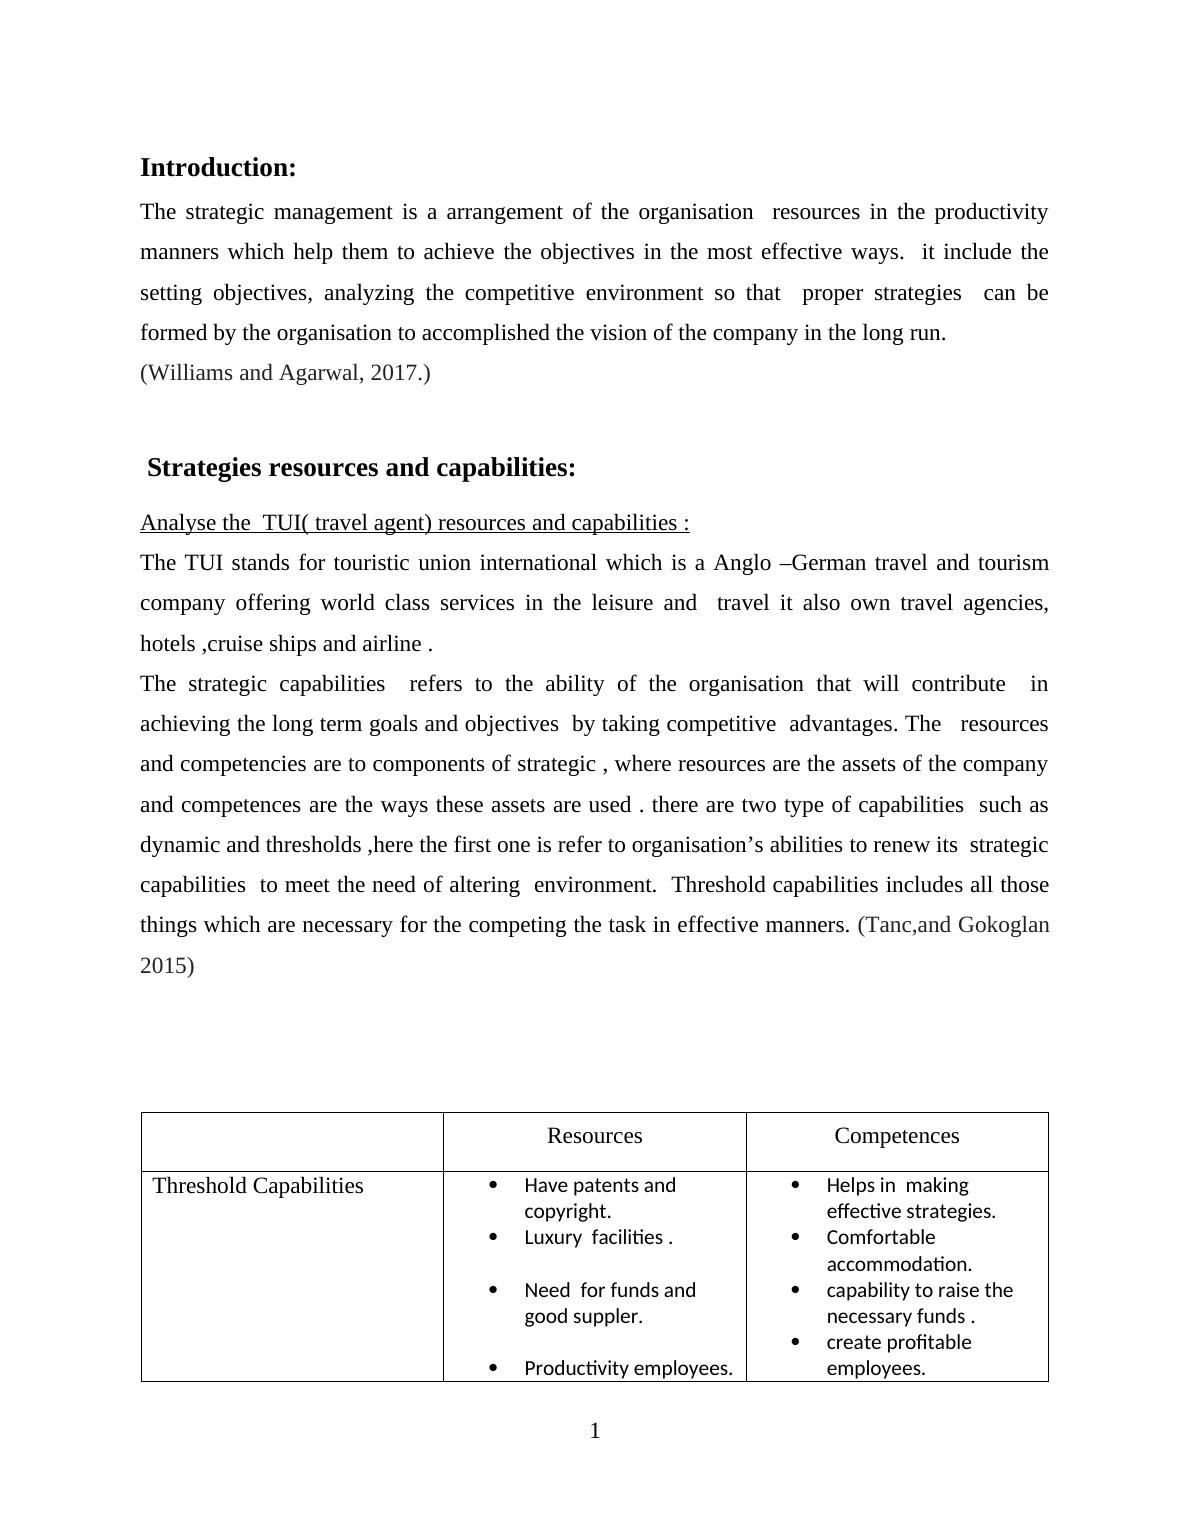 Strategic Management and Stakeholder Analysis for TUI and Airbnb_3